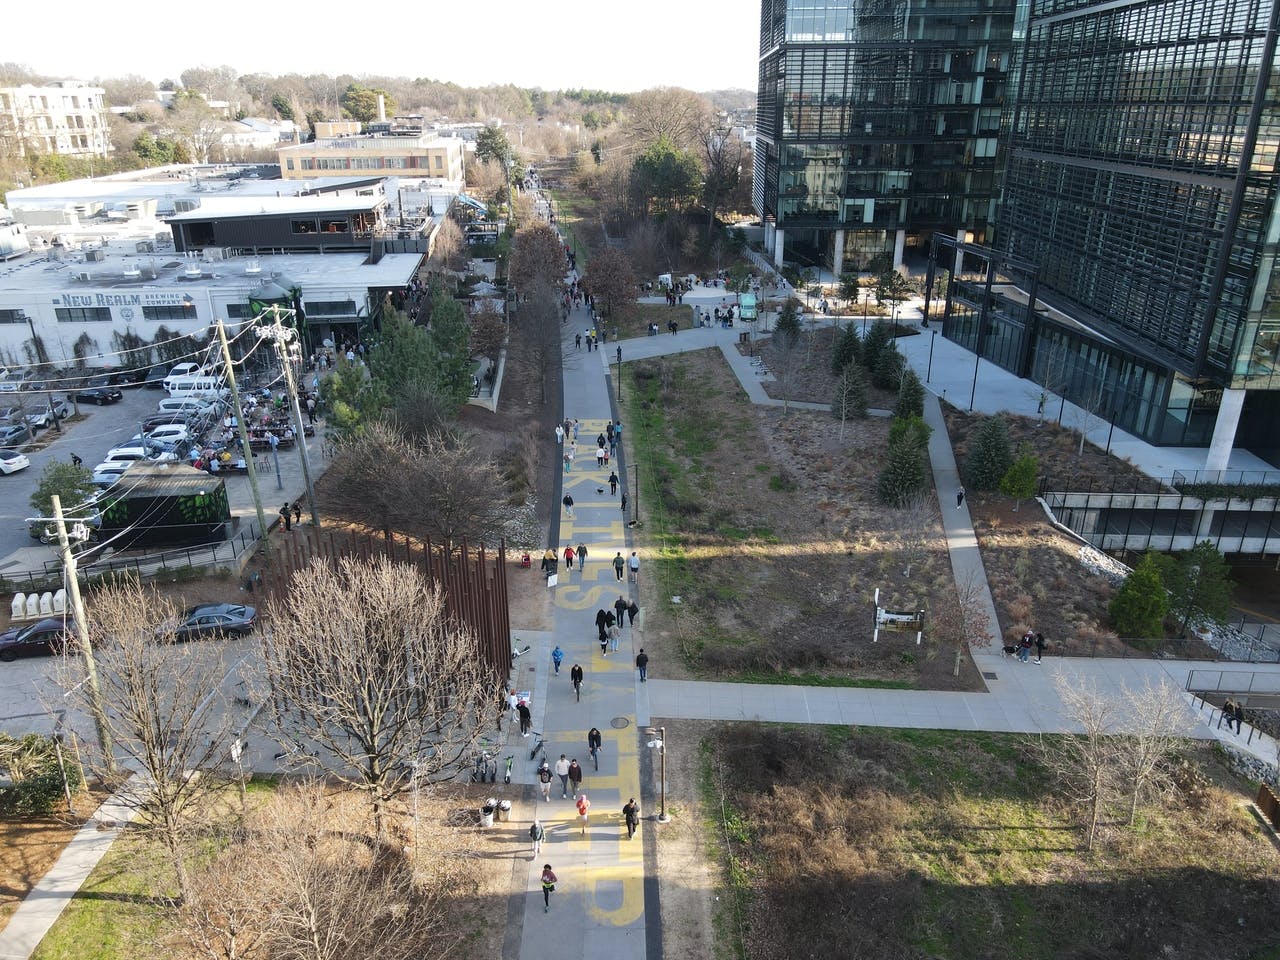 Drone shot of the Common Ground and Fourth Ward developments with the Eastside Trail in the middle. Photo by LoKnows Drones.